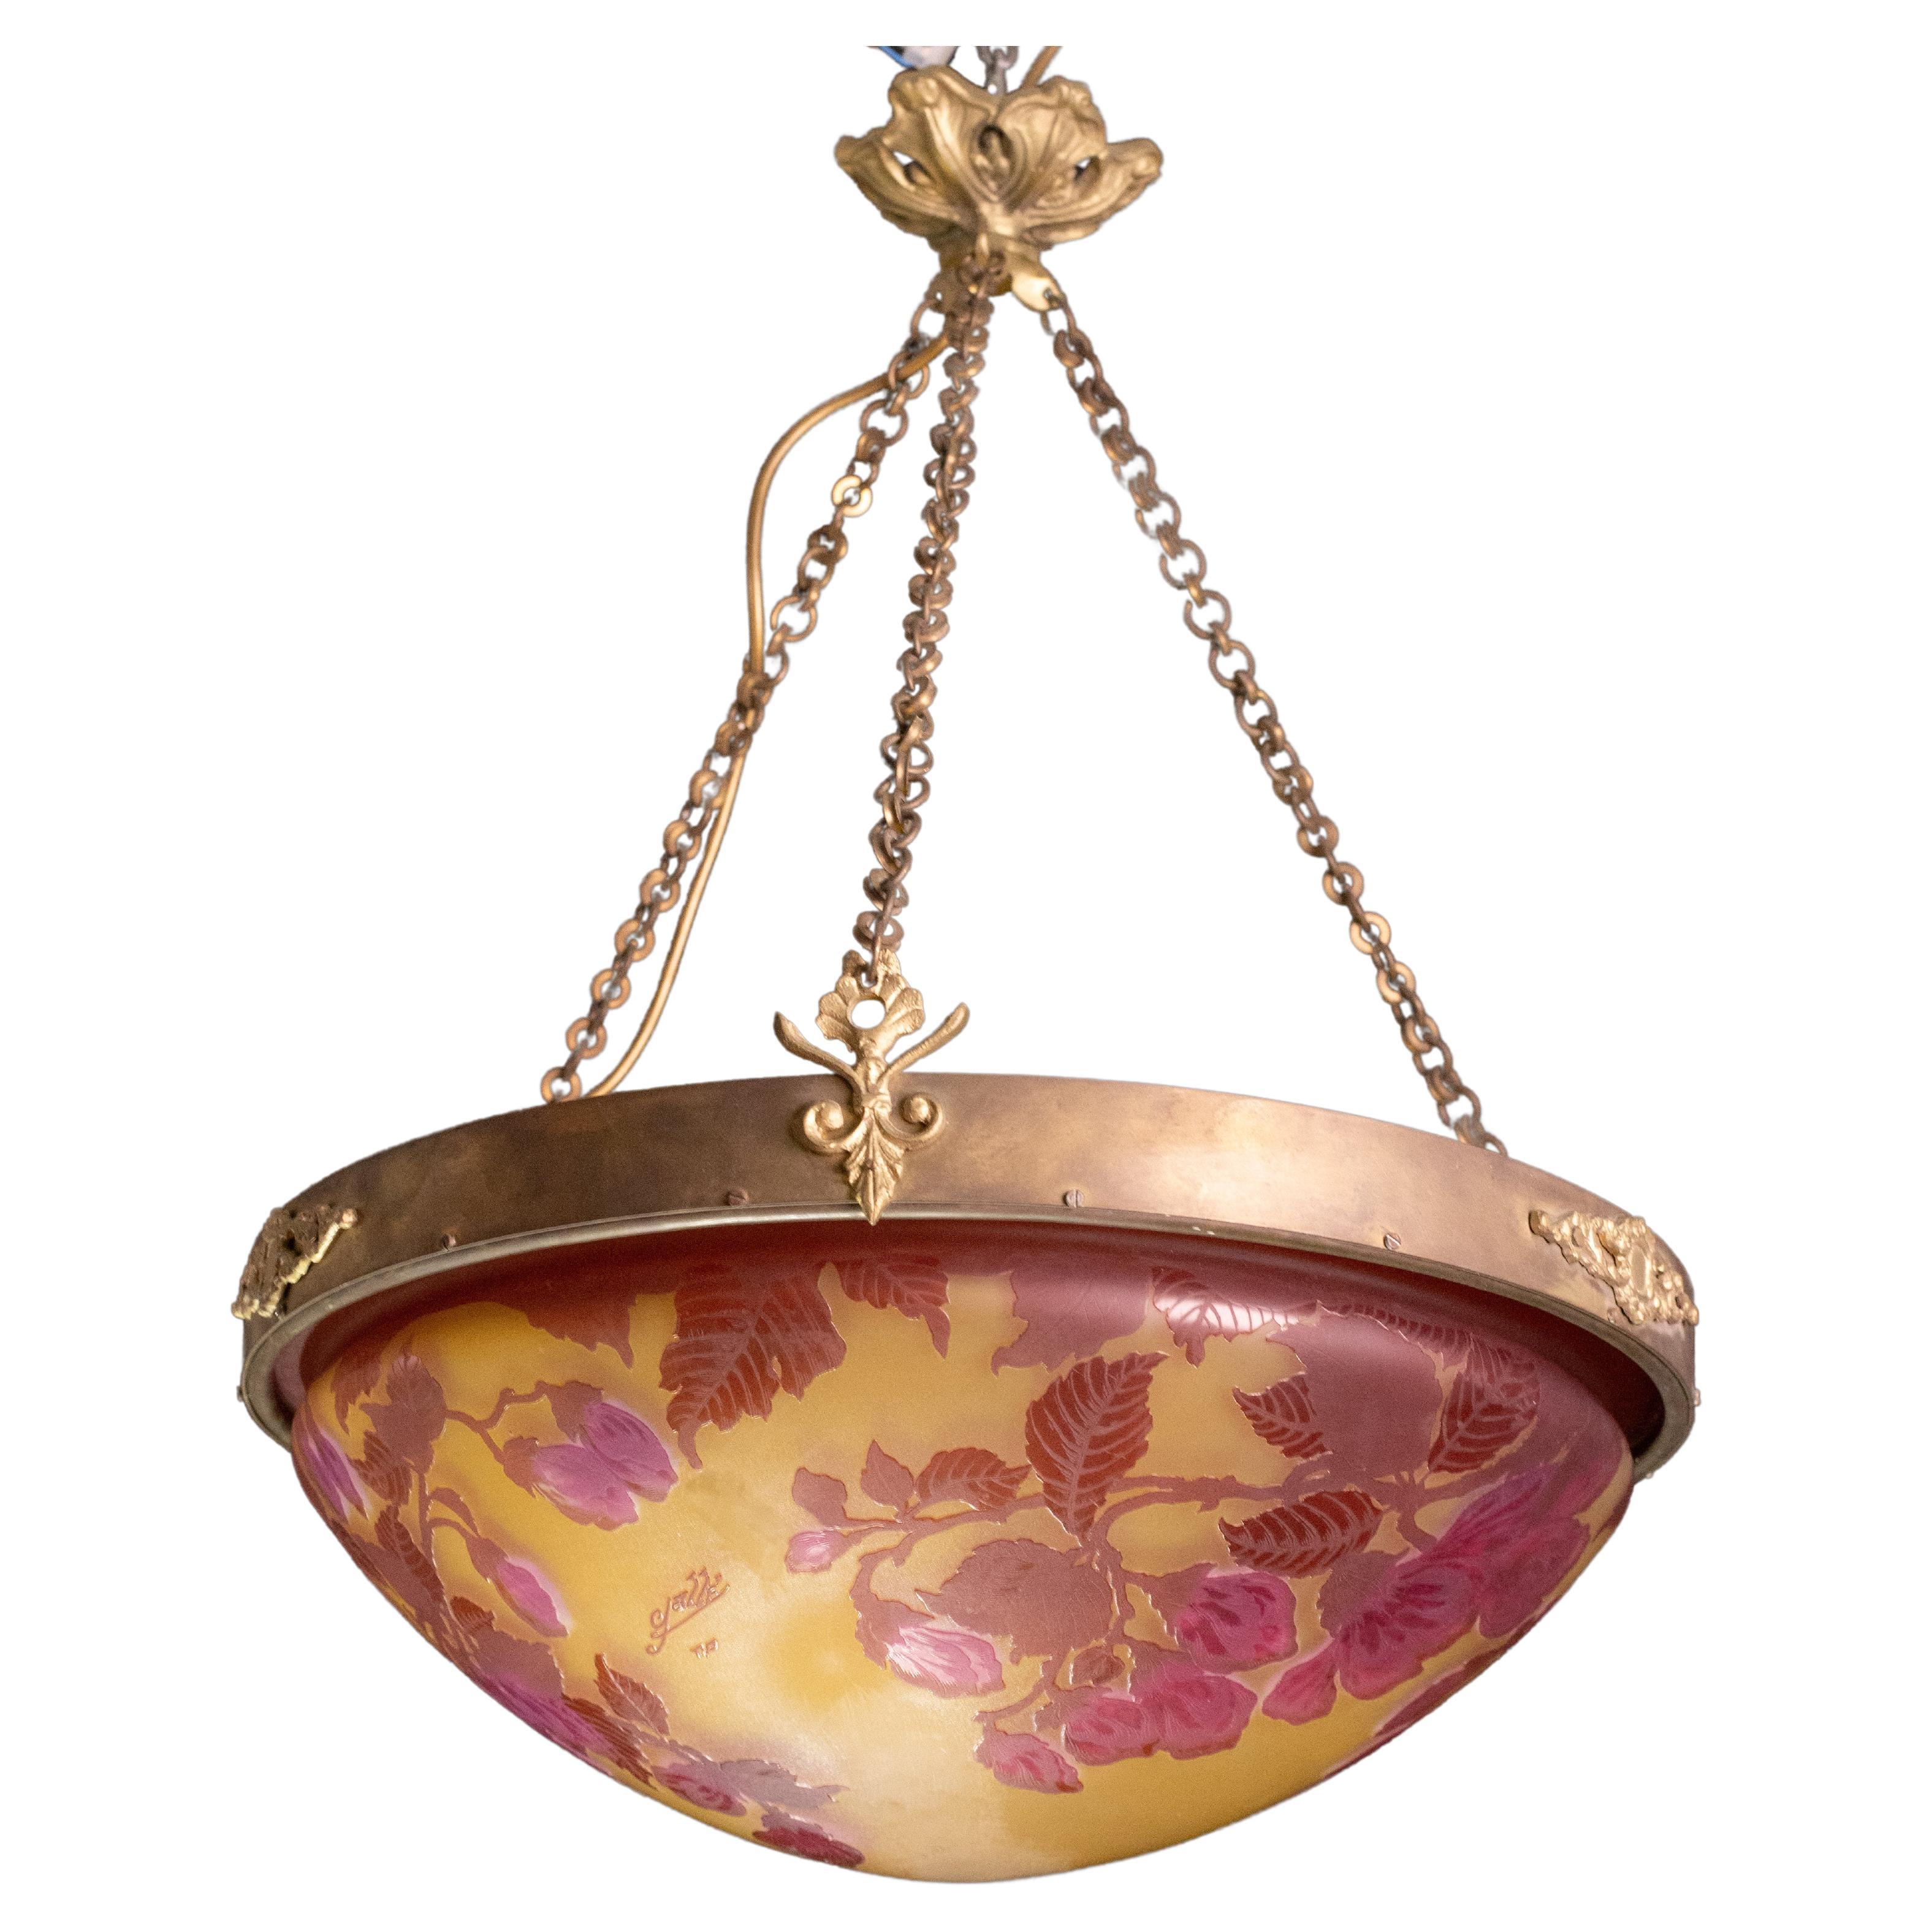 Rare Art Nouveau, Cameo glass and cast bronze chandelier by Émile Gallé. The unusual relief overlay depicts floral patterns on a multicolored background.
A beautiful disk that changes color when lit.
Signed: Gallé. 
Suspended by original cast bronze